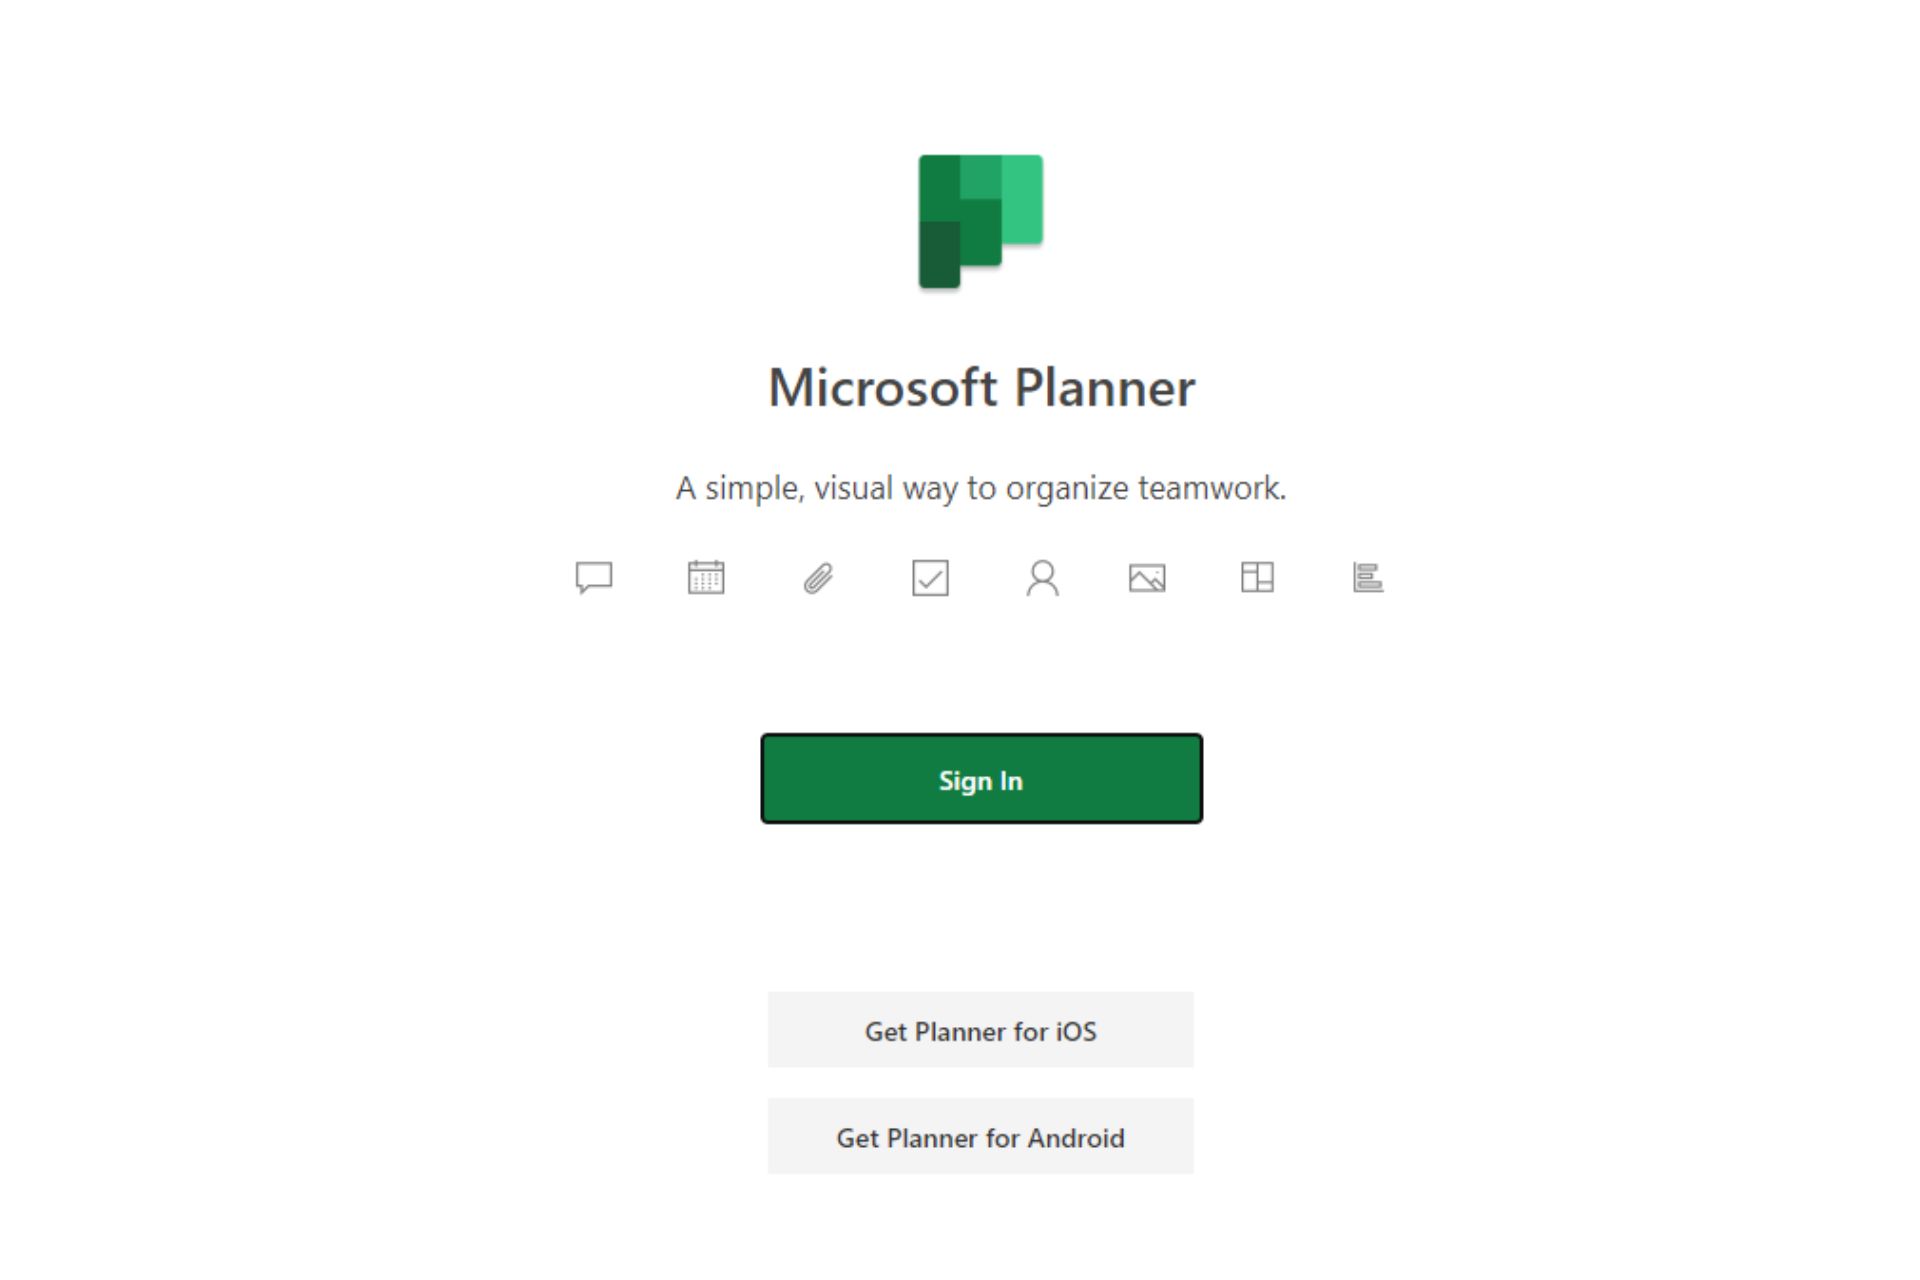 Microsoft Planner’s new enhancements will make it easier for frontline workers to keep track of their activity